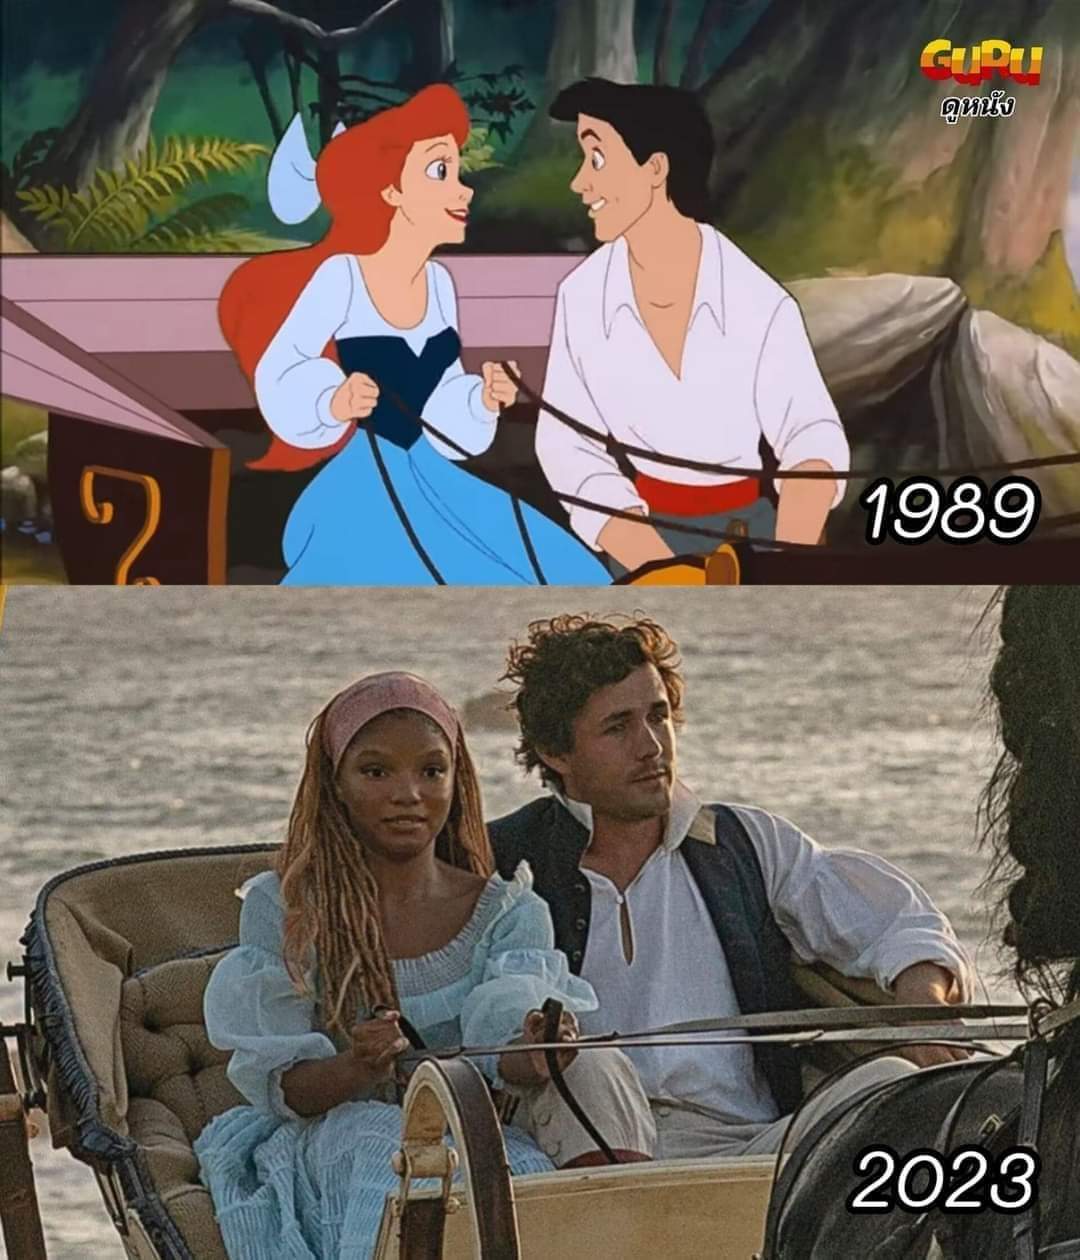 Read more about the article Little Mermaid 1989 vs. 2023